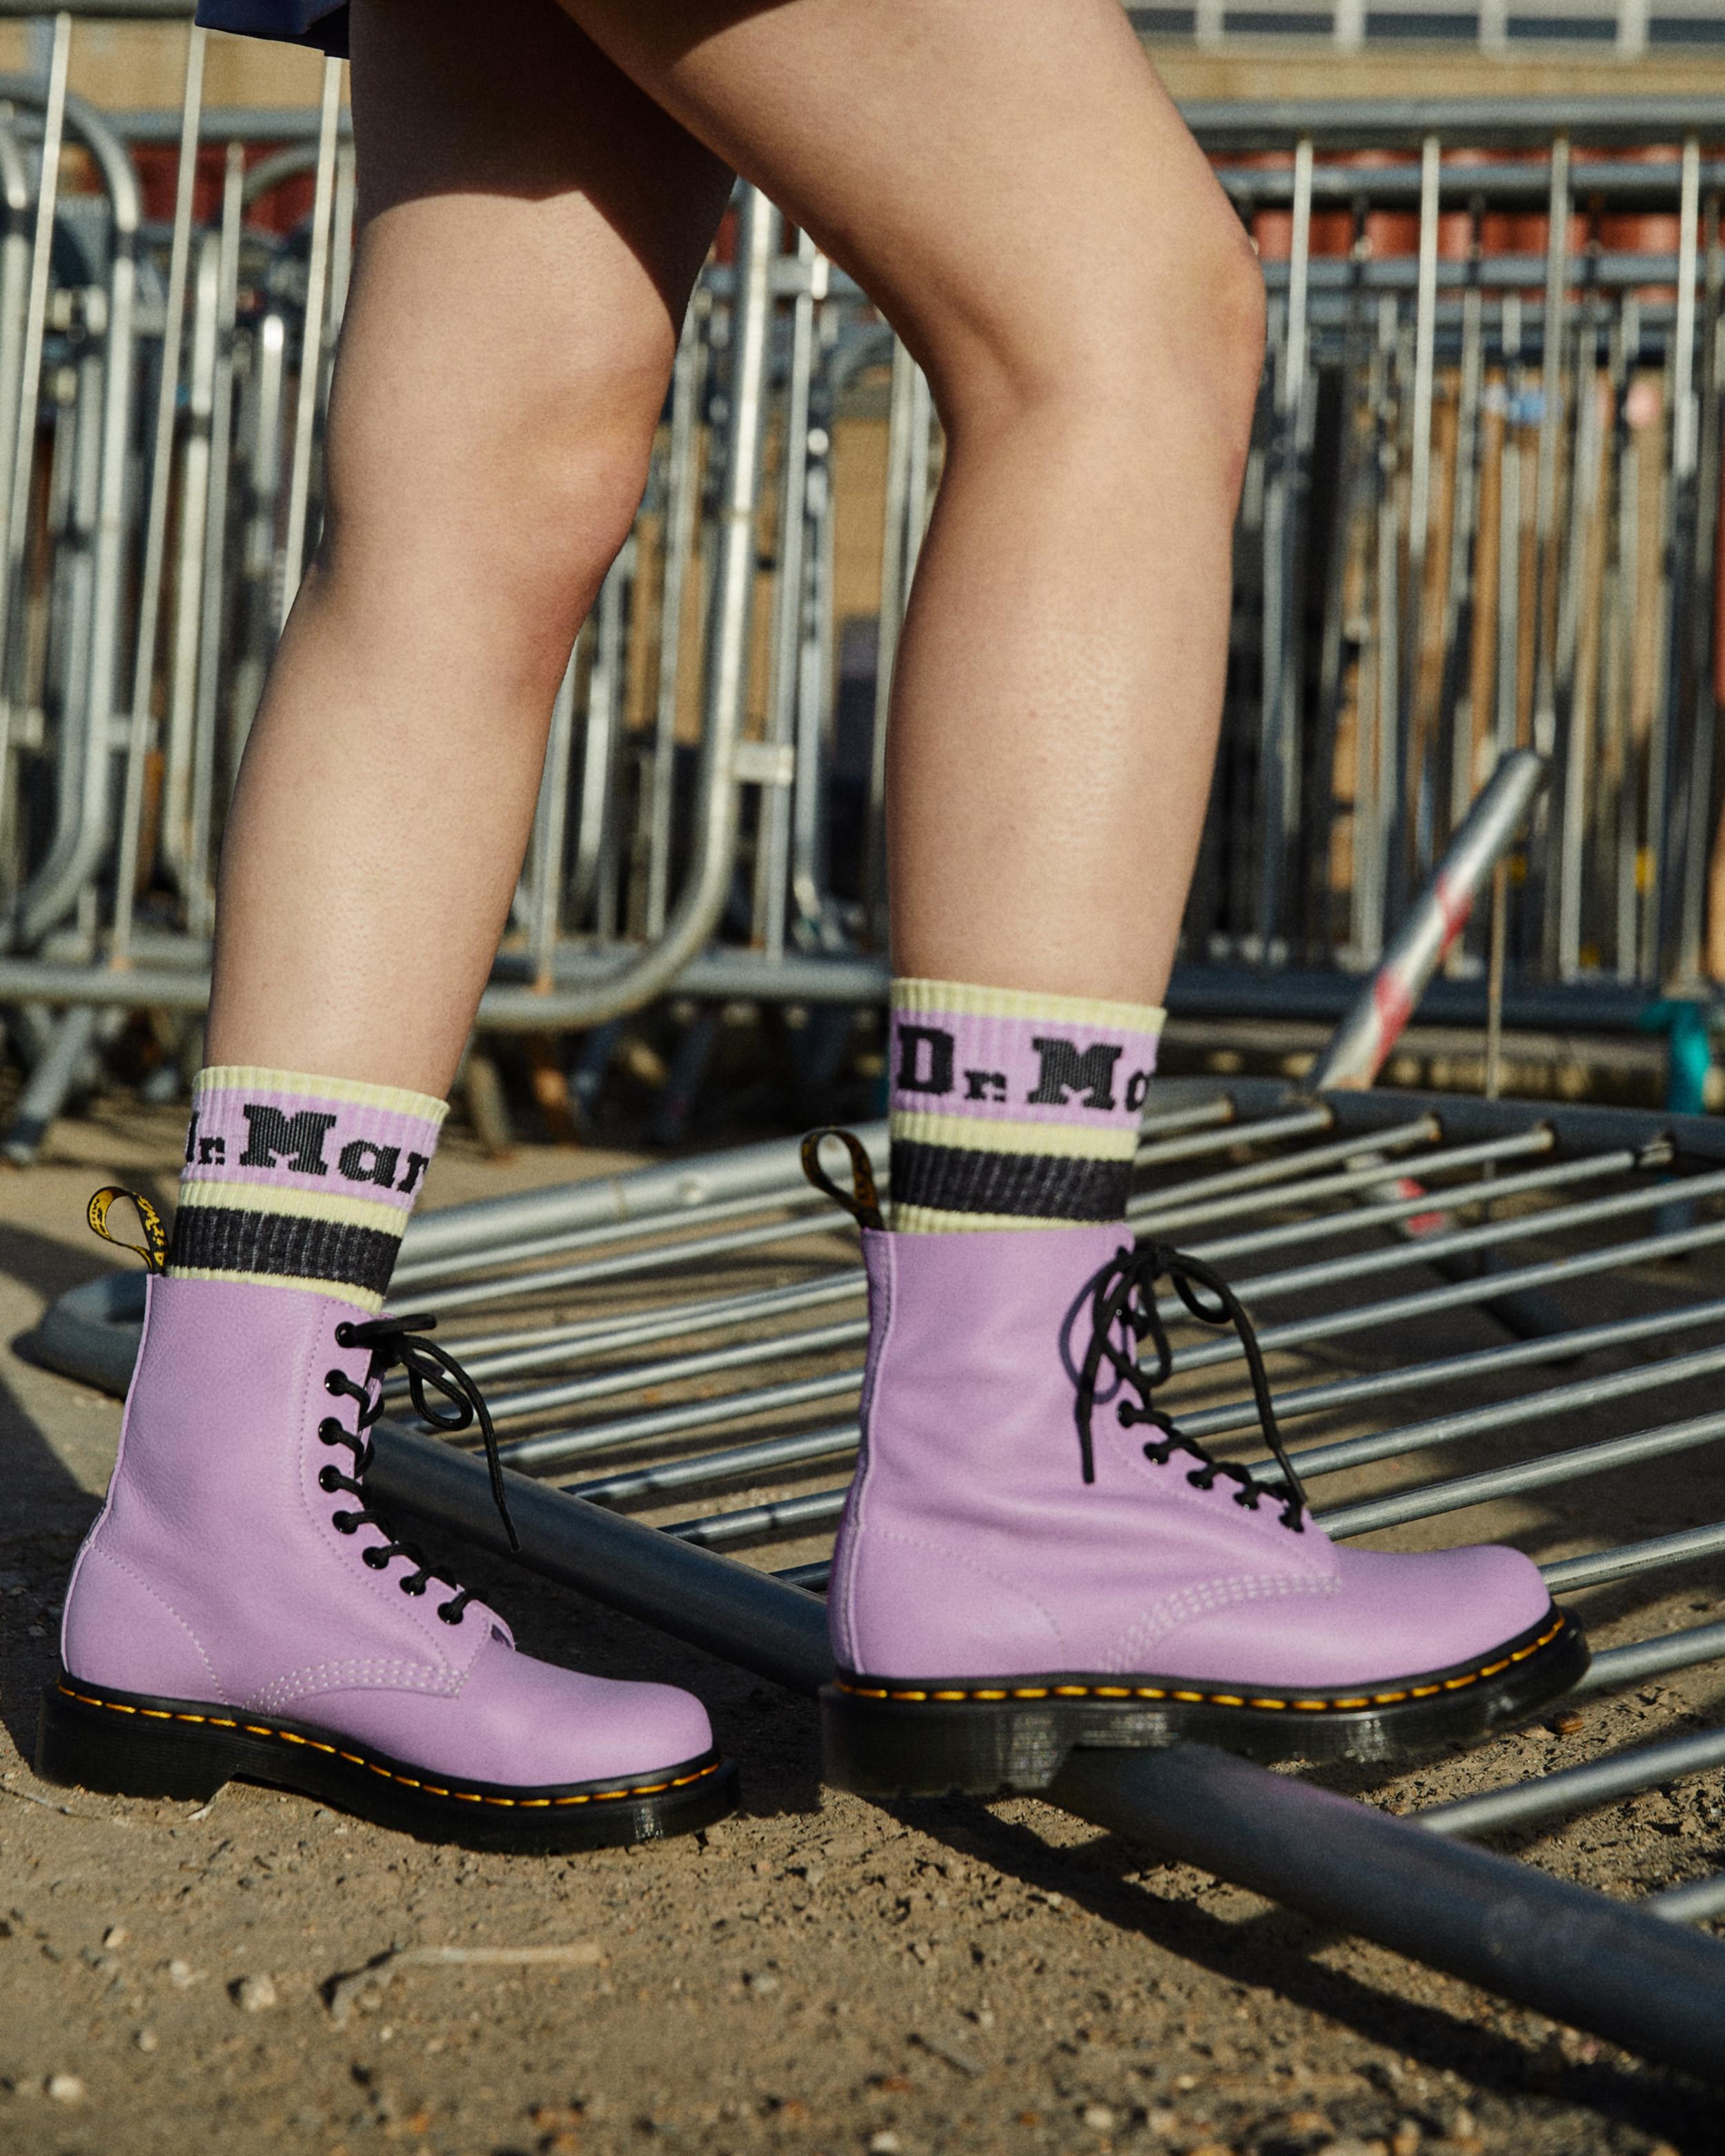 1460 Women's Pascal Black Eyelet Lace Up Boots in Lilac | Dr. Martens